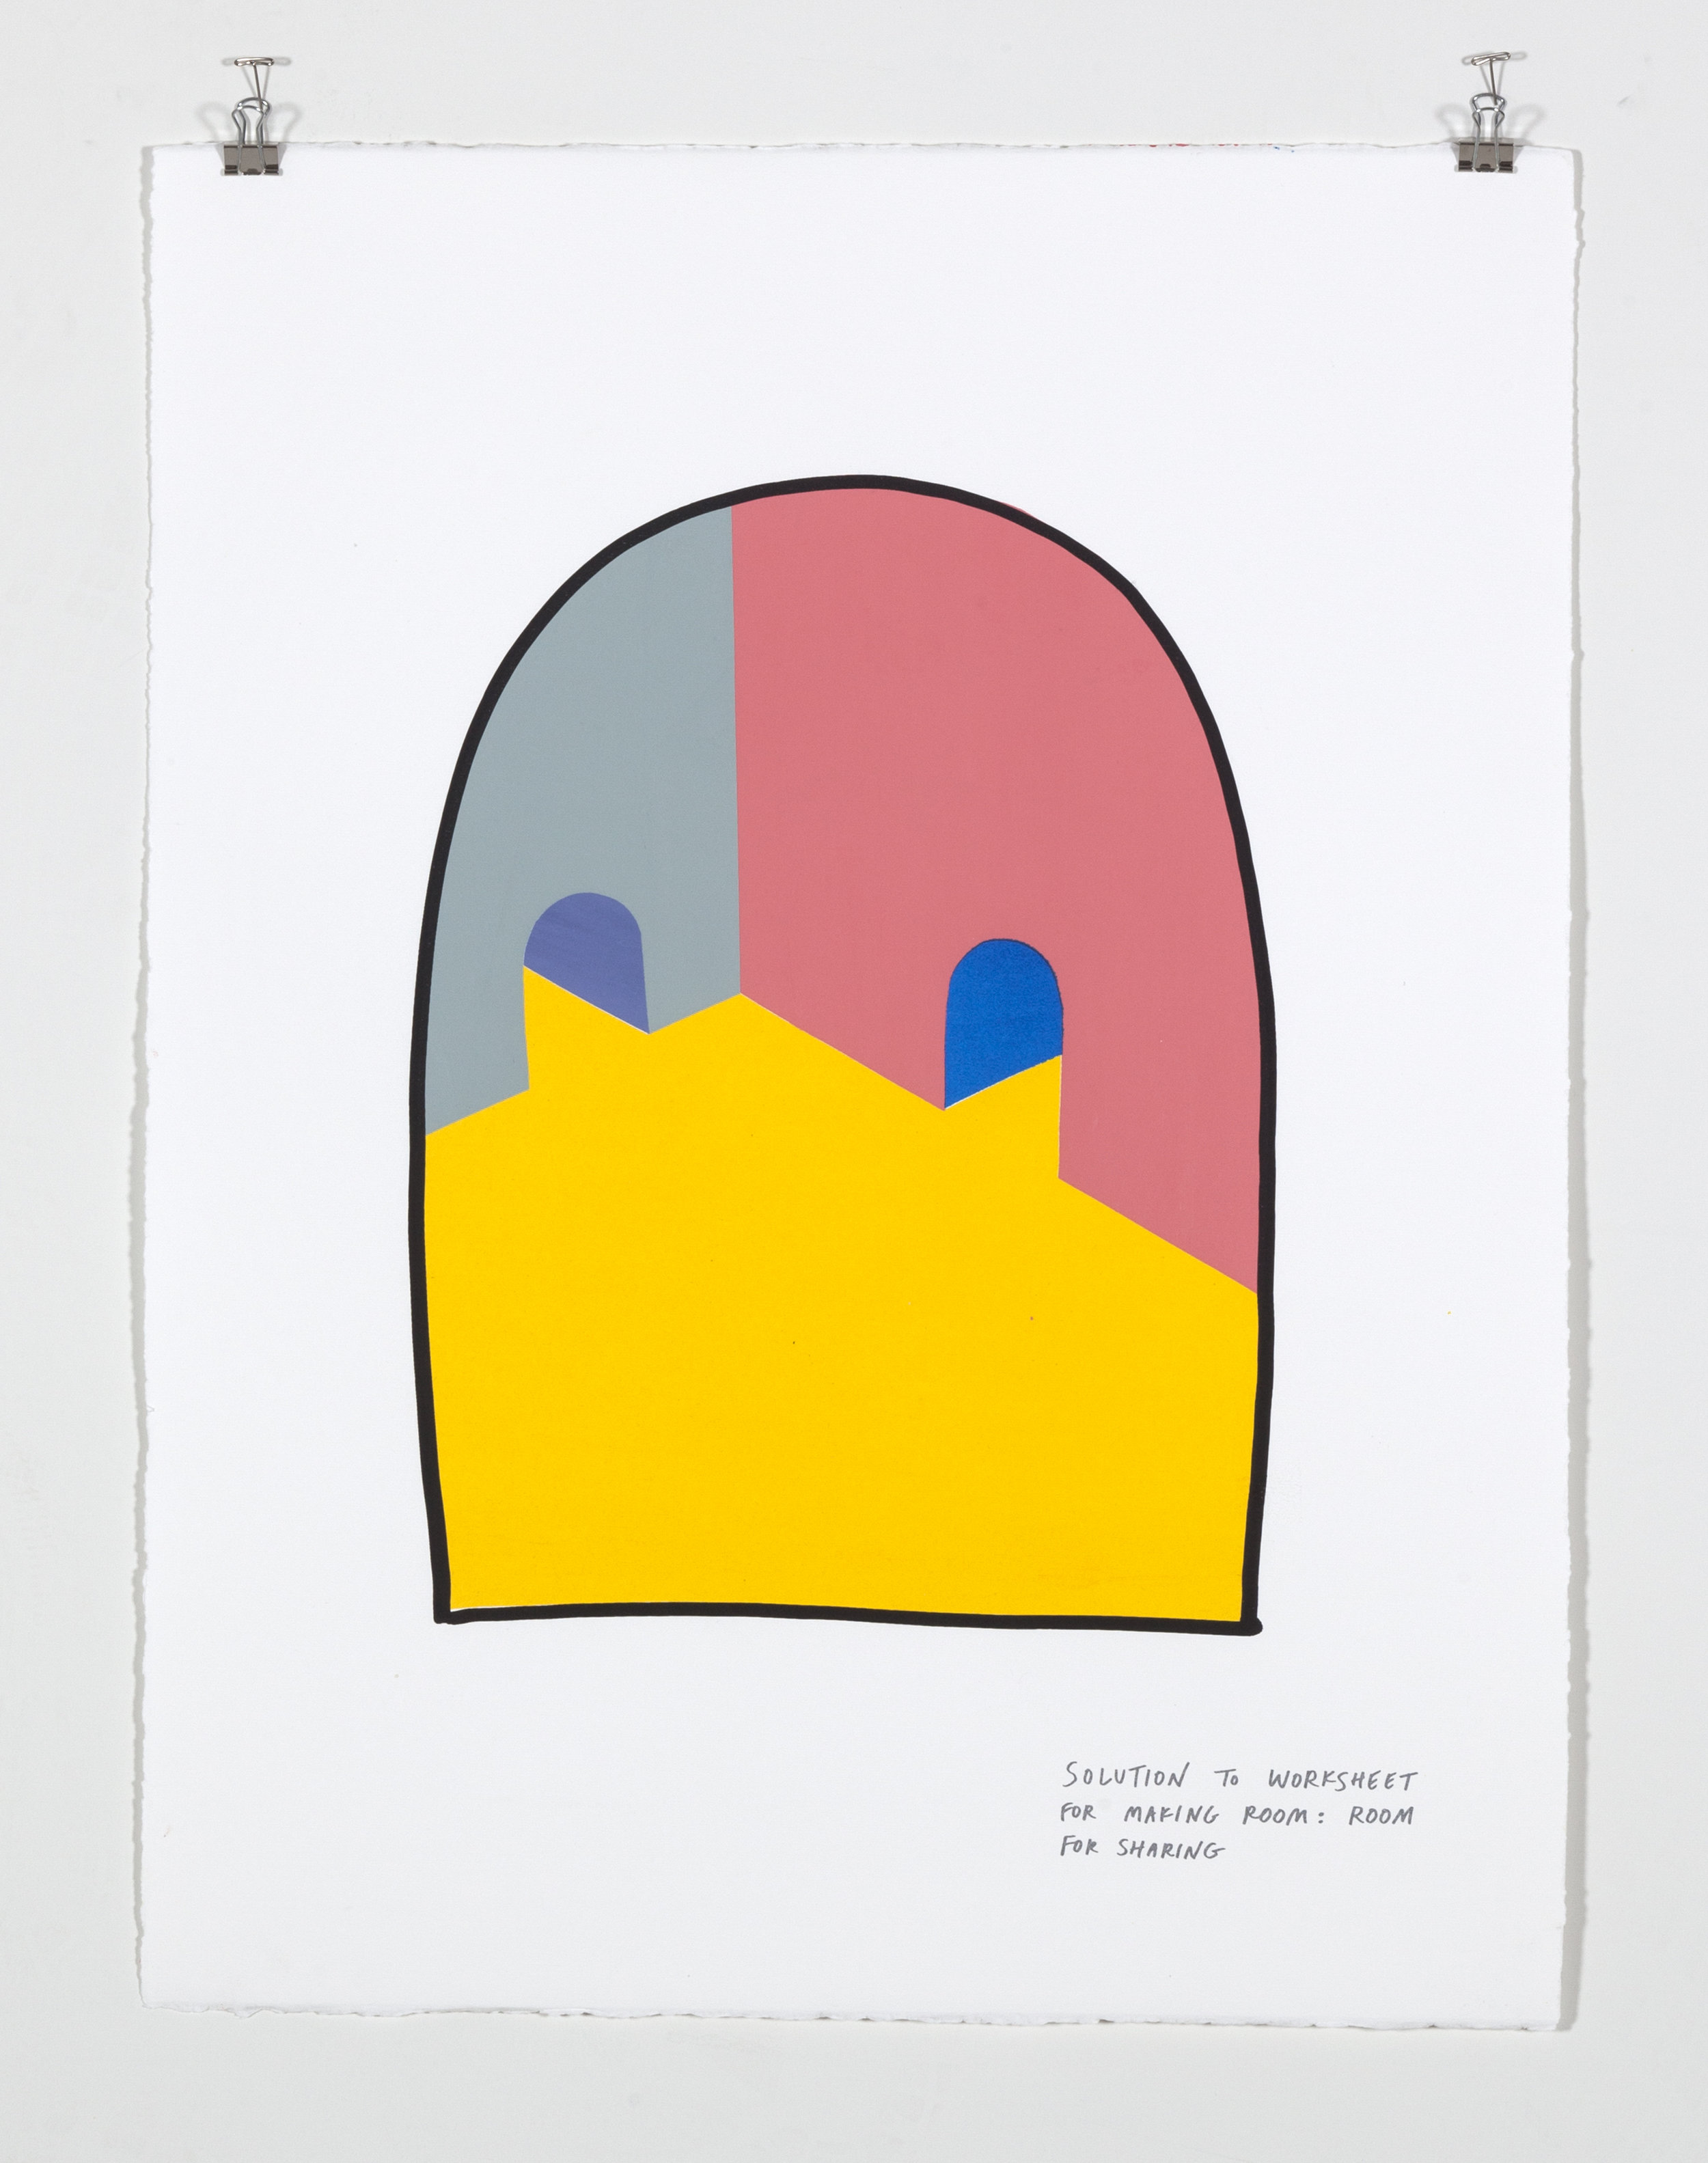    Solution to Worksheet for Making Room: Room for Sharing,    2018  Seven color silkscreen print on paper 19 7/8 x 25 7/8 inches 